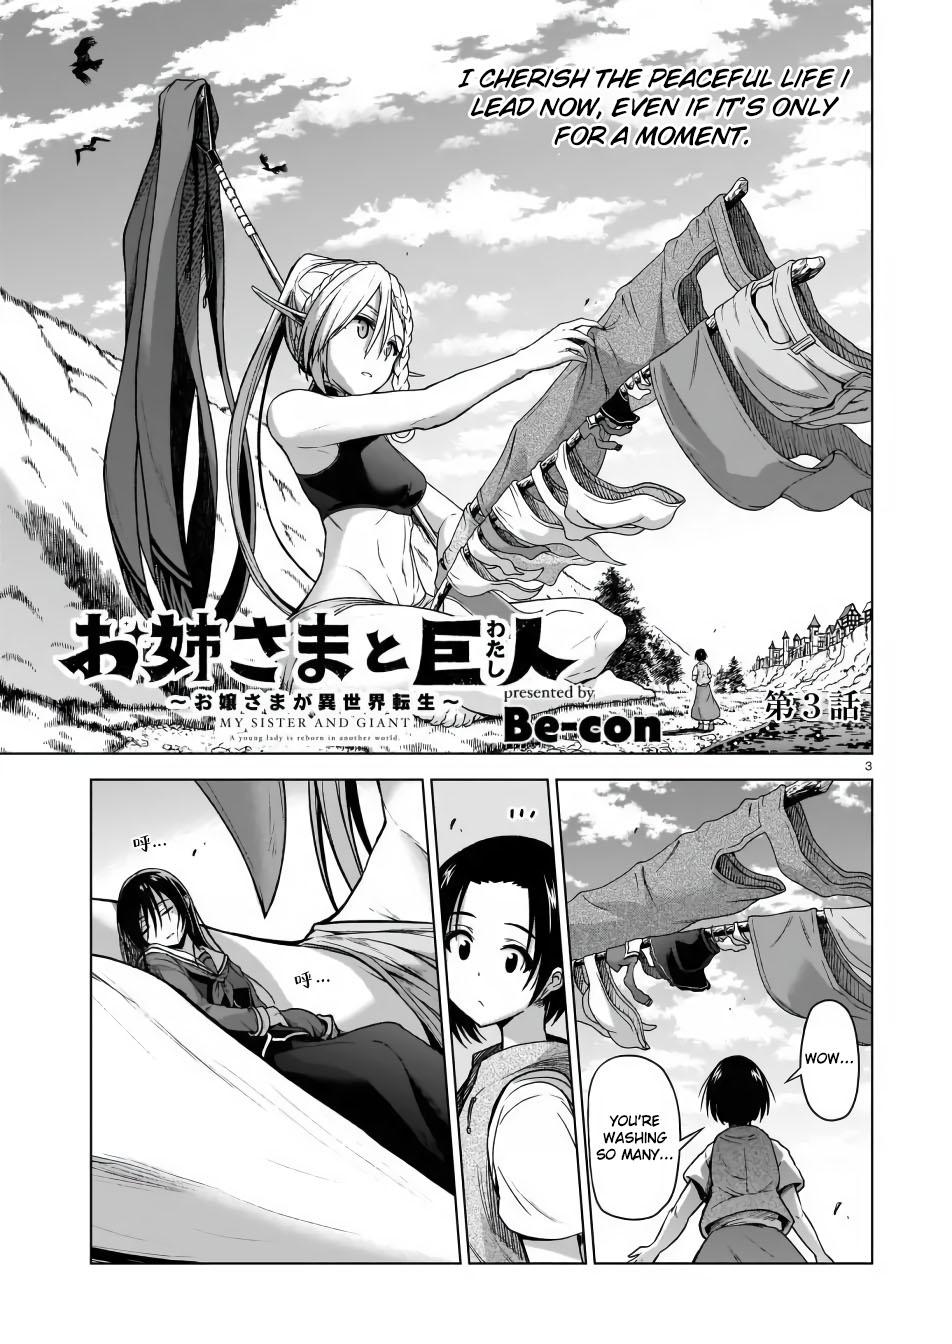 The Onee-Sama And The Giant - Page 3